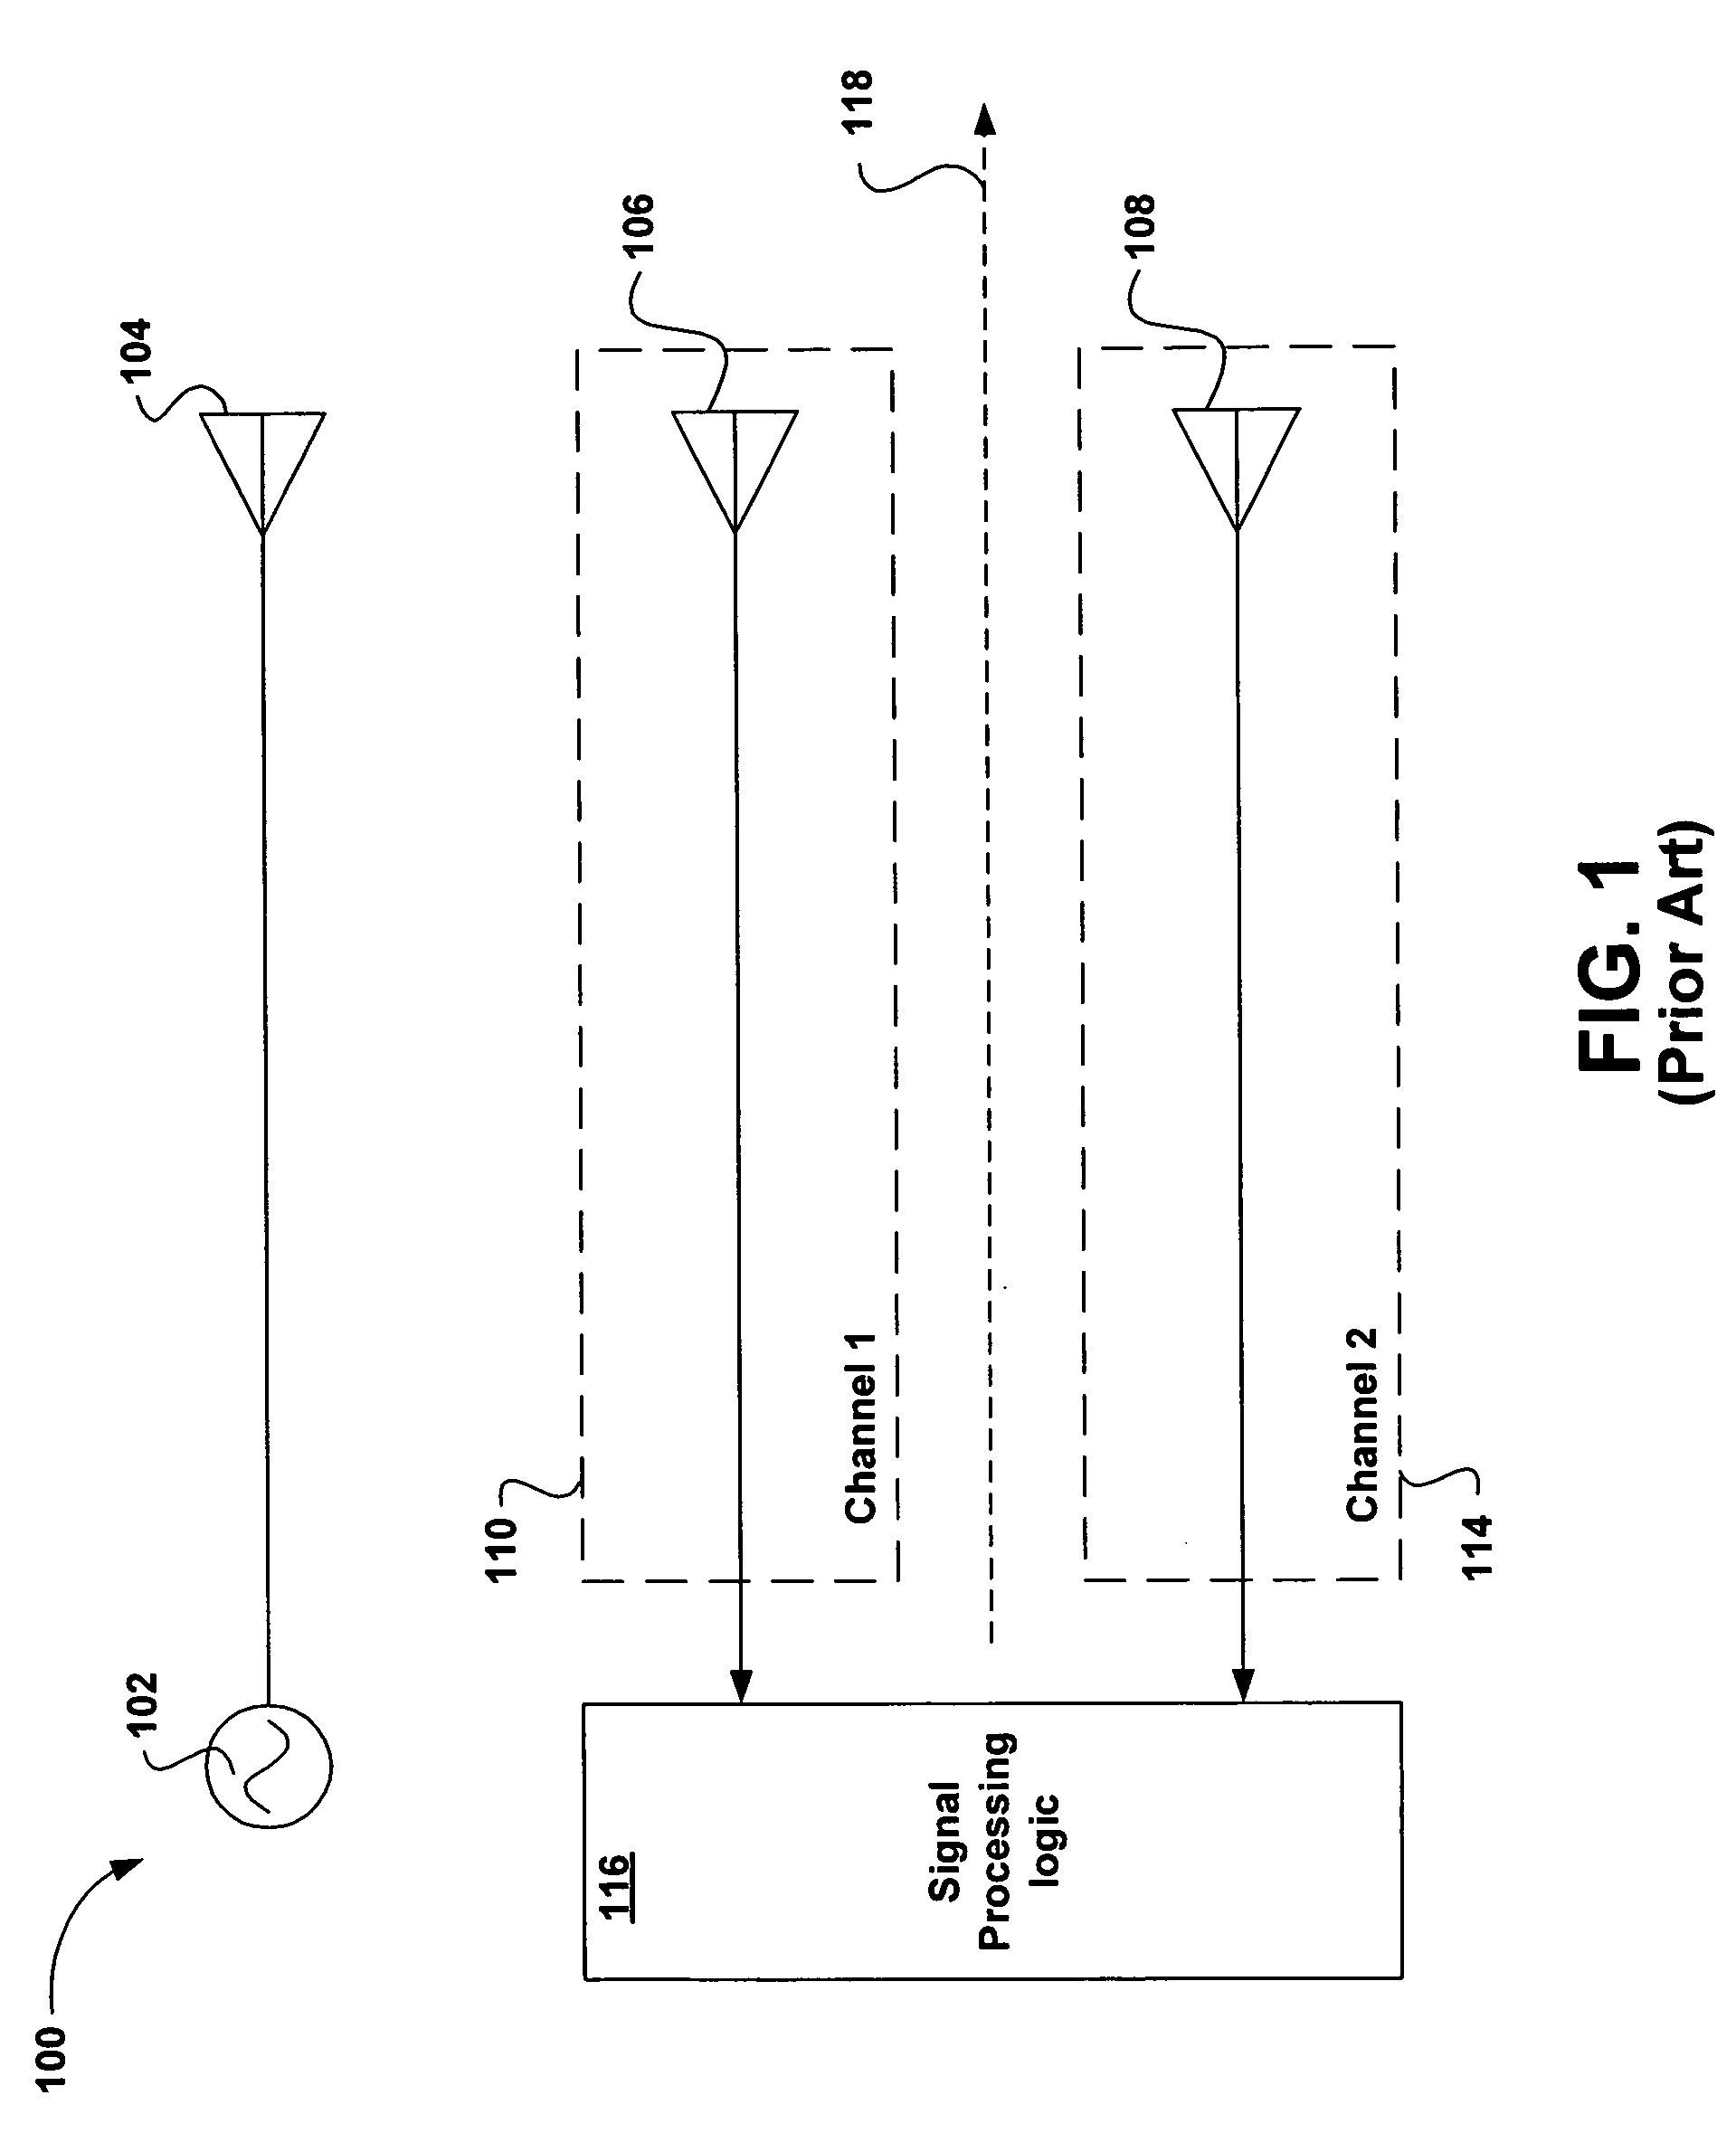 System and method for estimating the azimuth pointing angle of a moving monopulse antenna